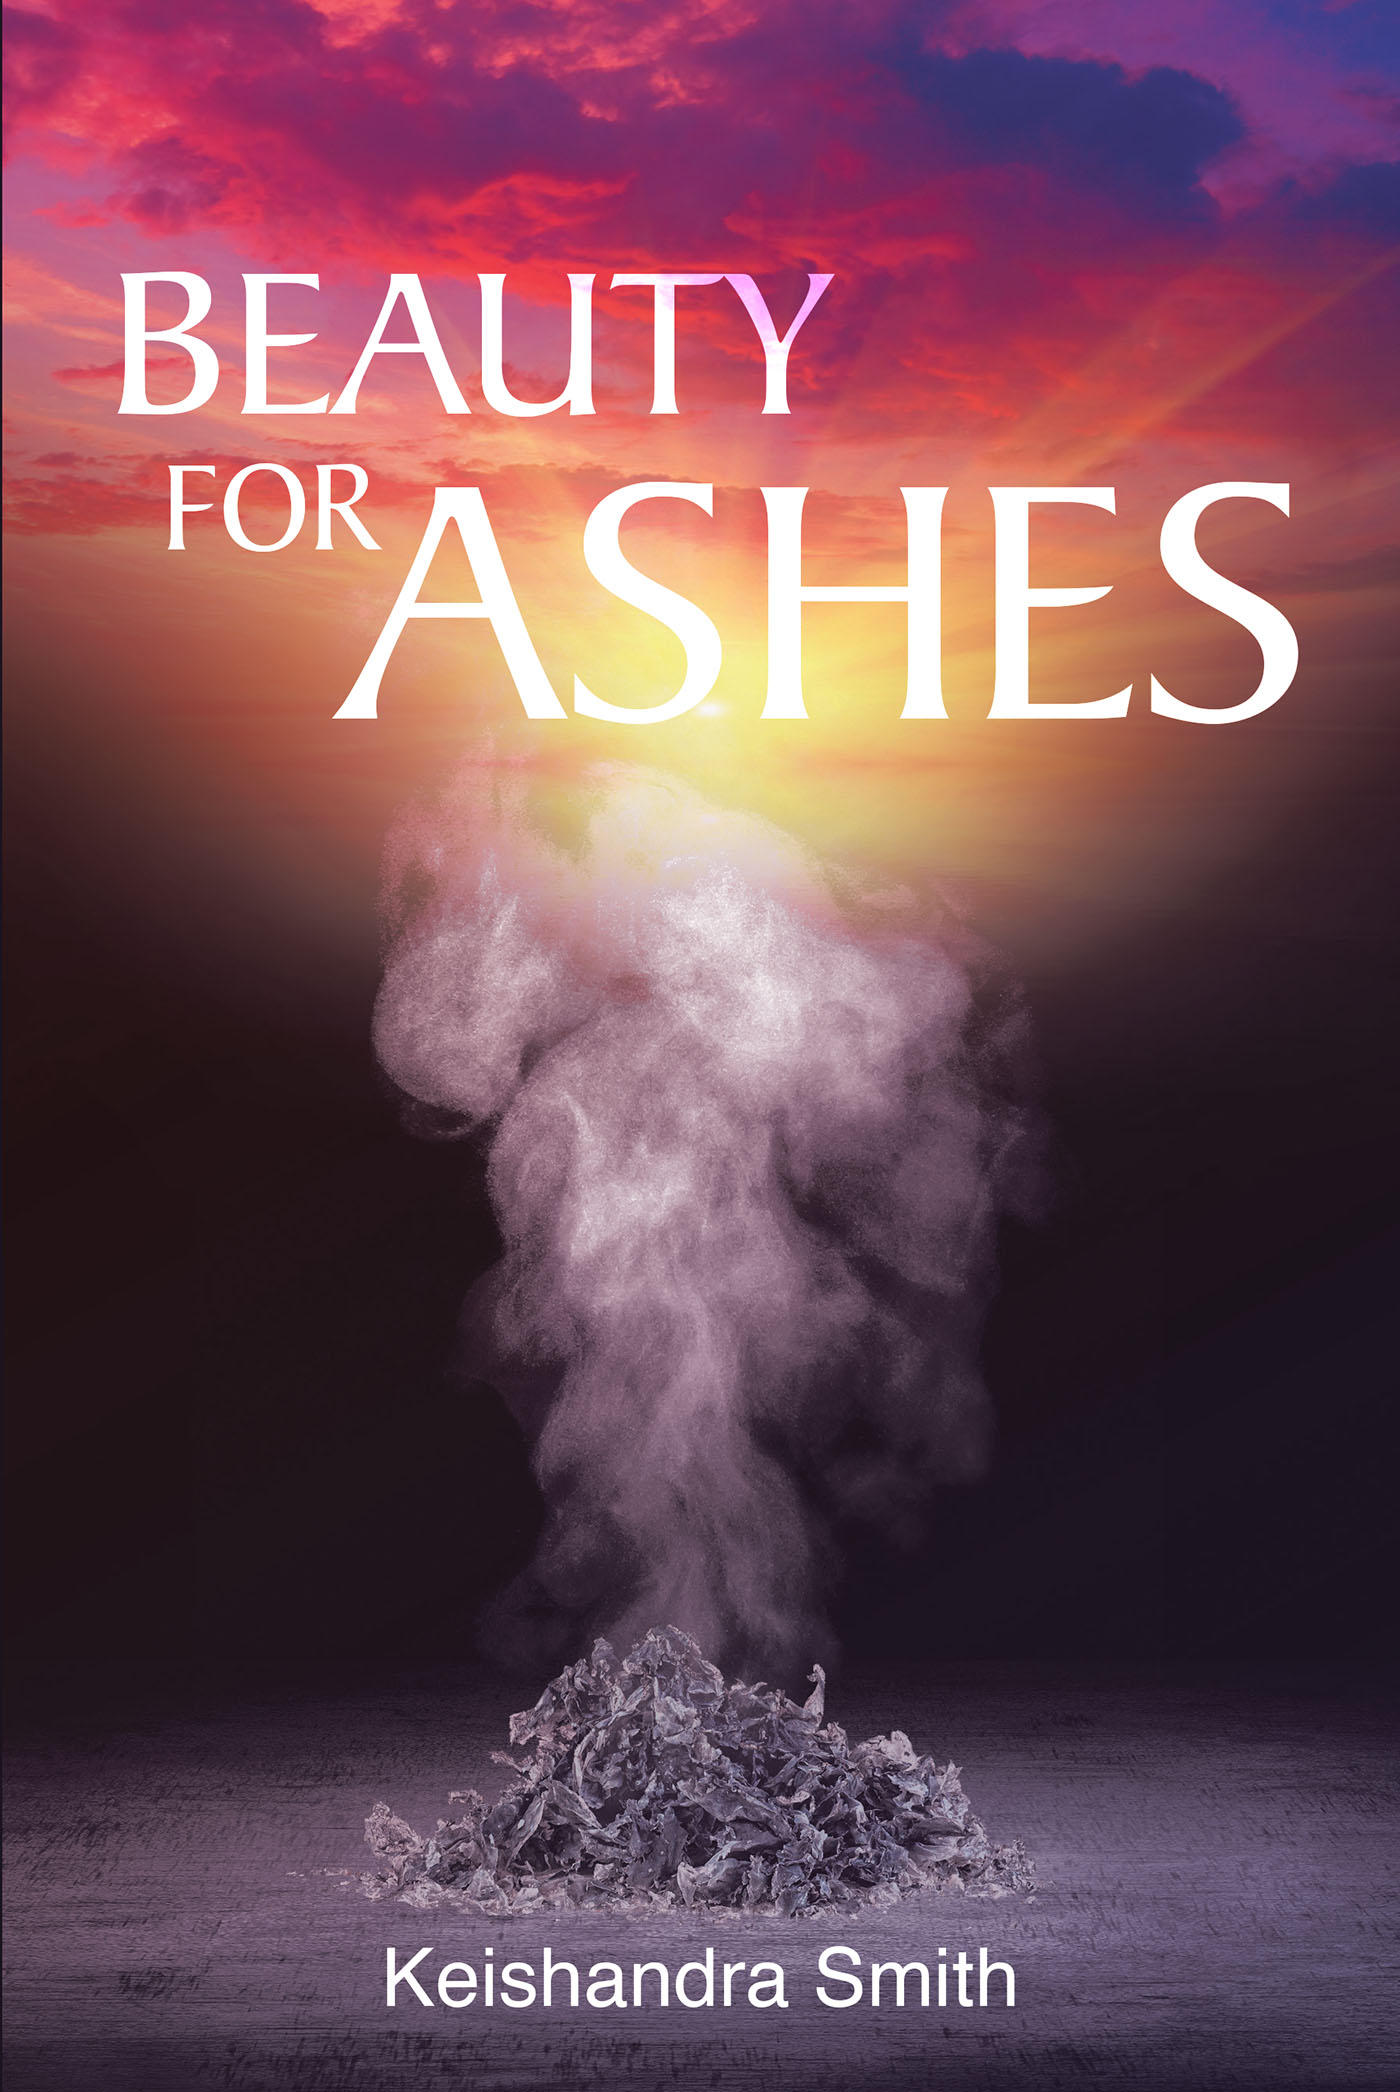 Keishandra Smith’s Newly Released "Beauty for Ashes" is an Inspiring Resource for Anyone Working to Heal and Grow Through Christ